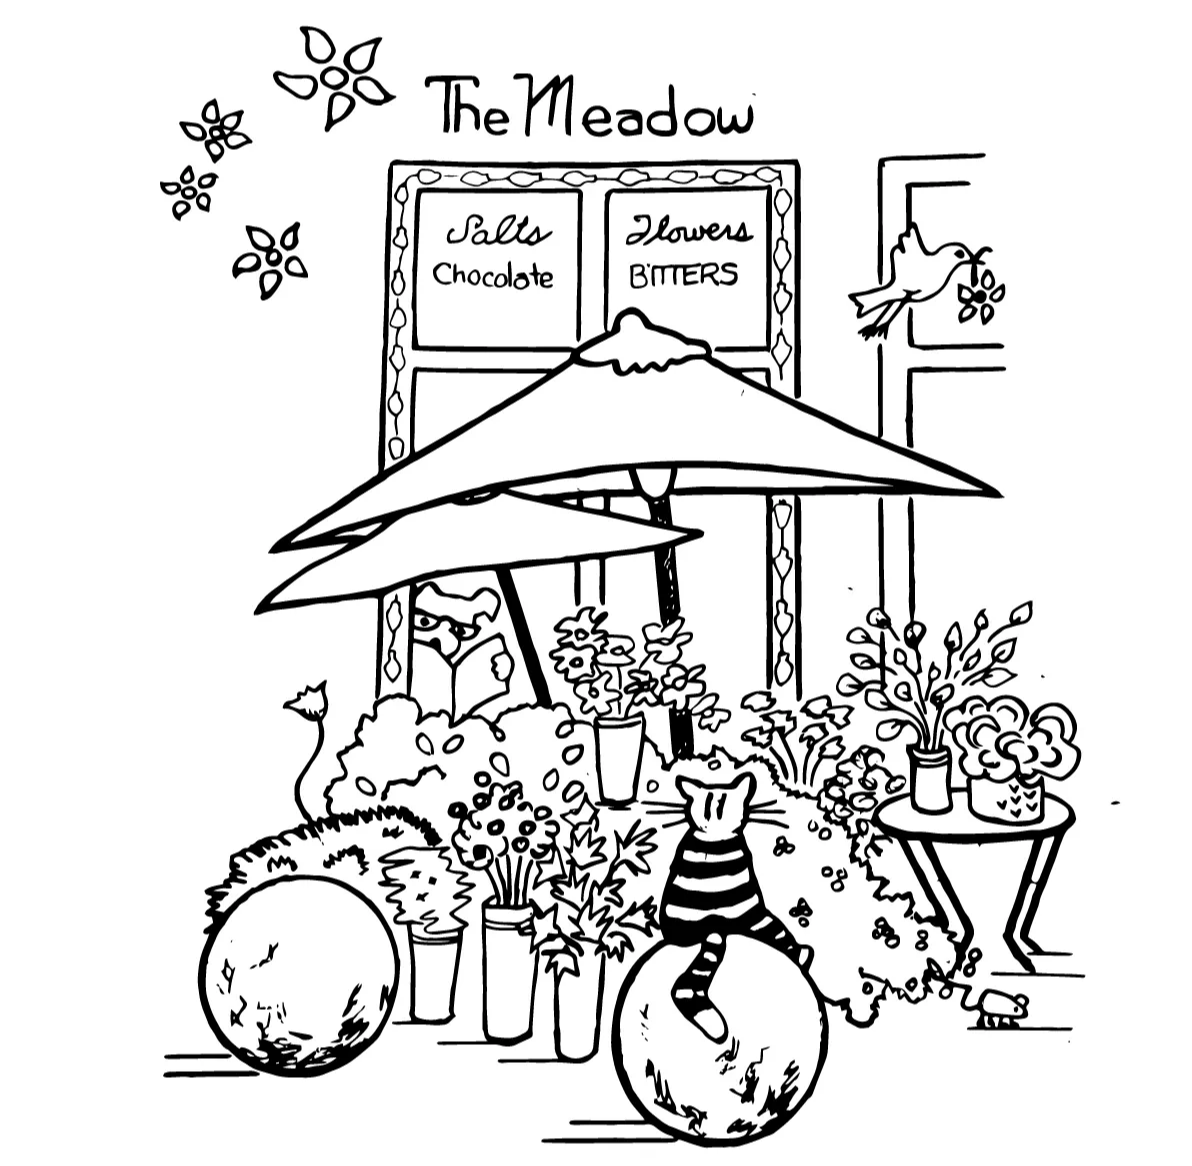 sketch of the meadow on mississippi avenue in portland, oregon